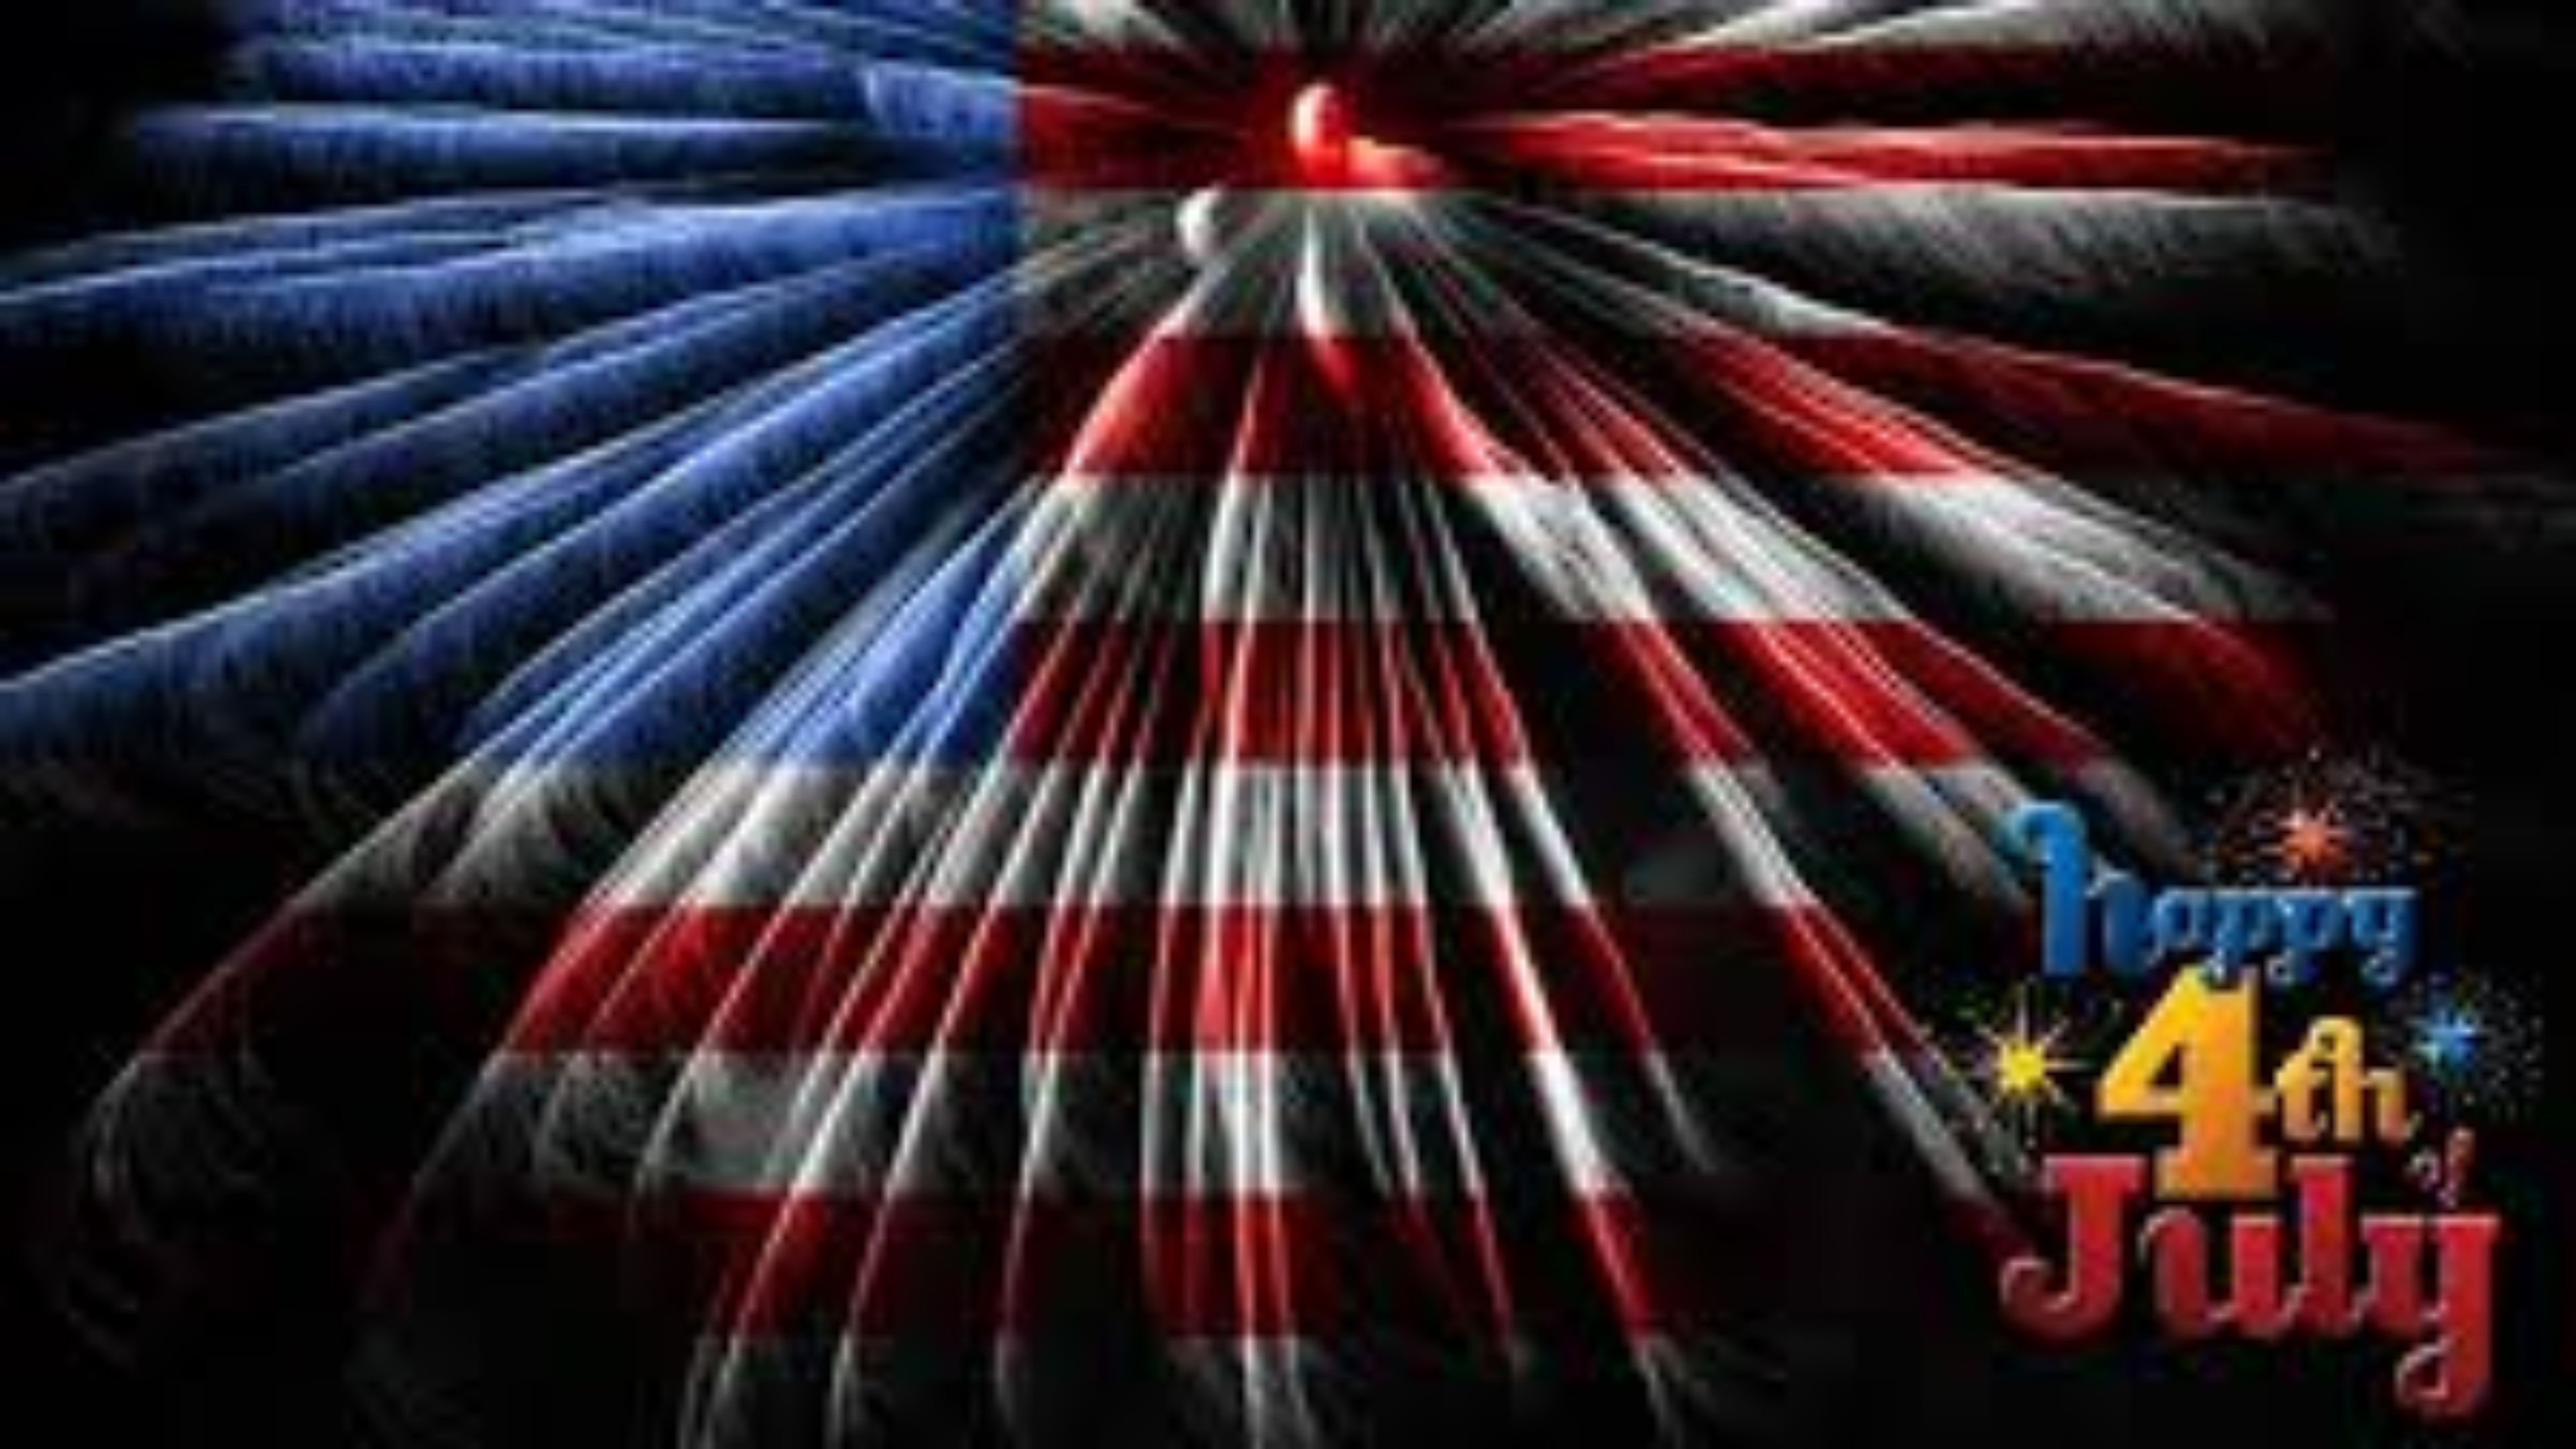 3840x2160 Wonderful 4K Photos 4Th Of July Live Wallpaper in 4Th Of July Wallpaper